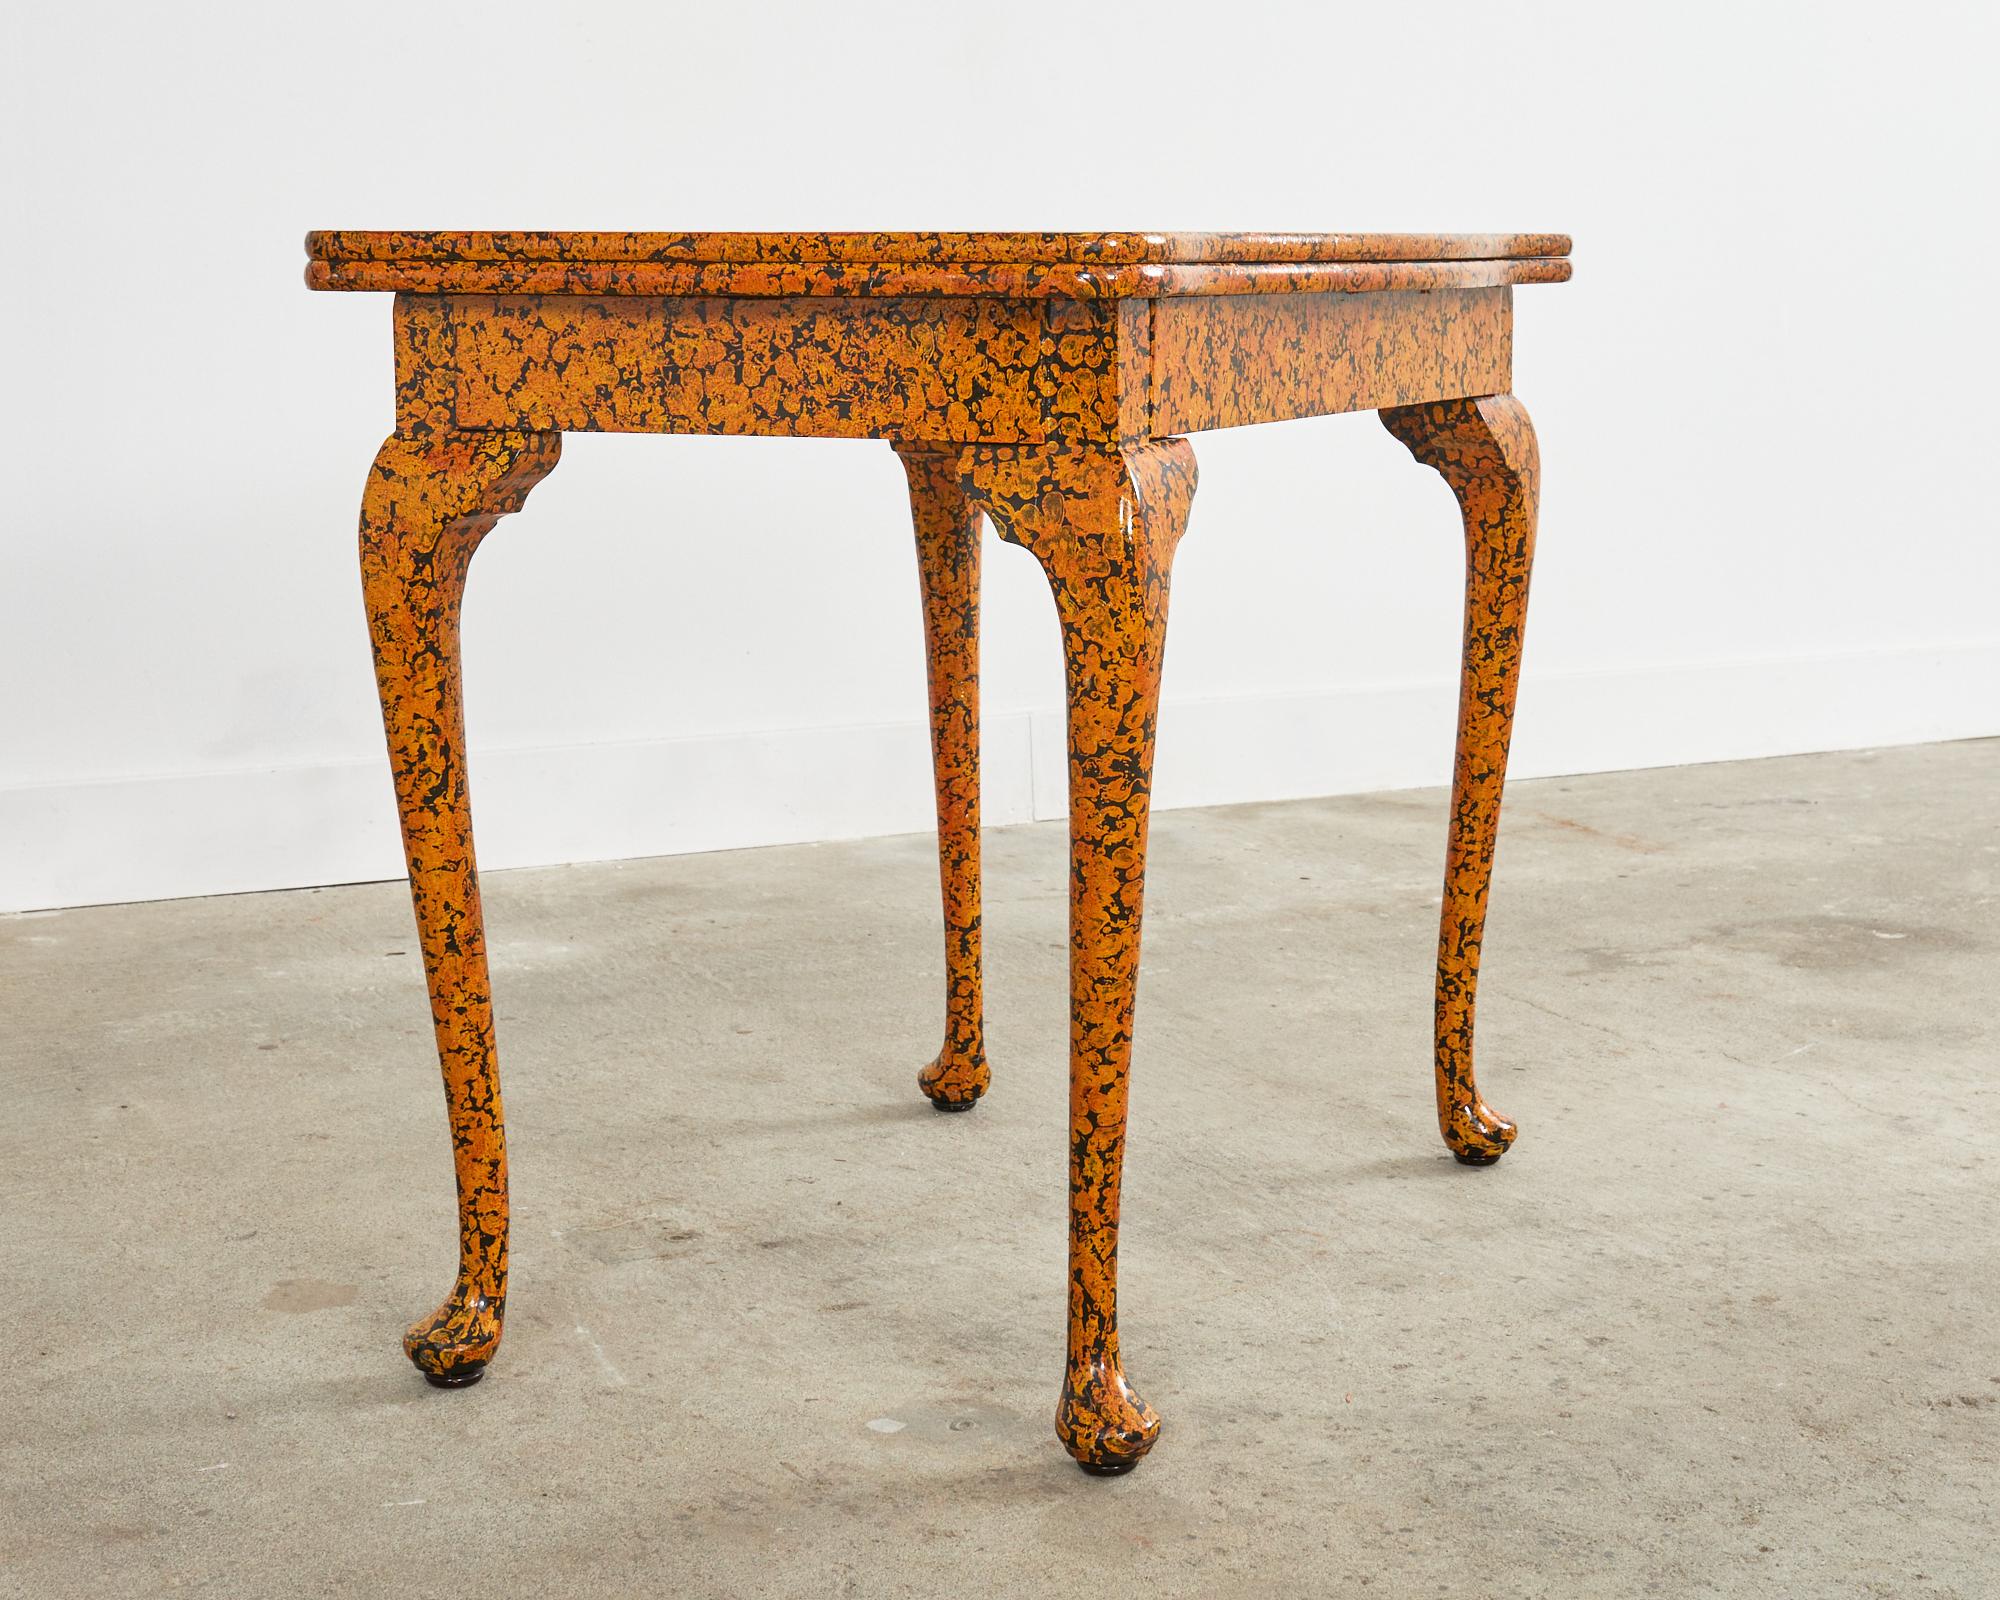 English Queen Anne Style Games Table Desk Speckled by Ira Yeager